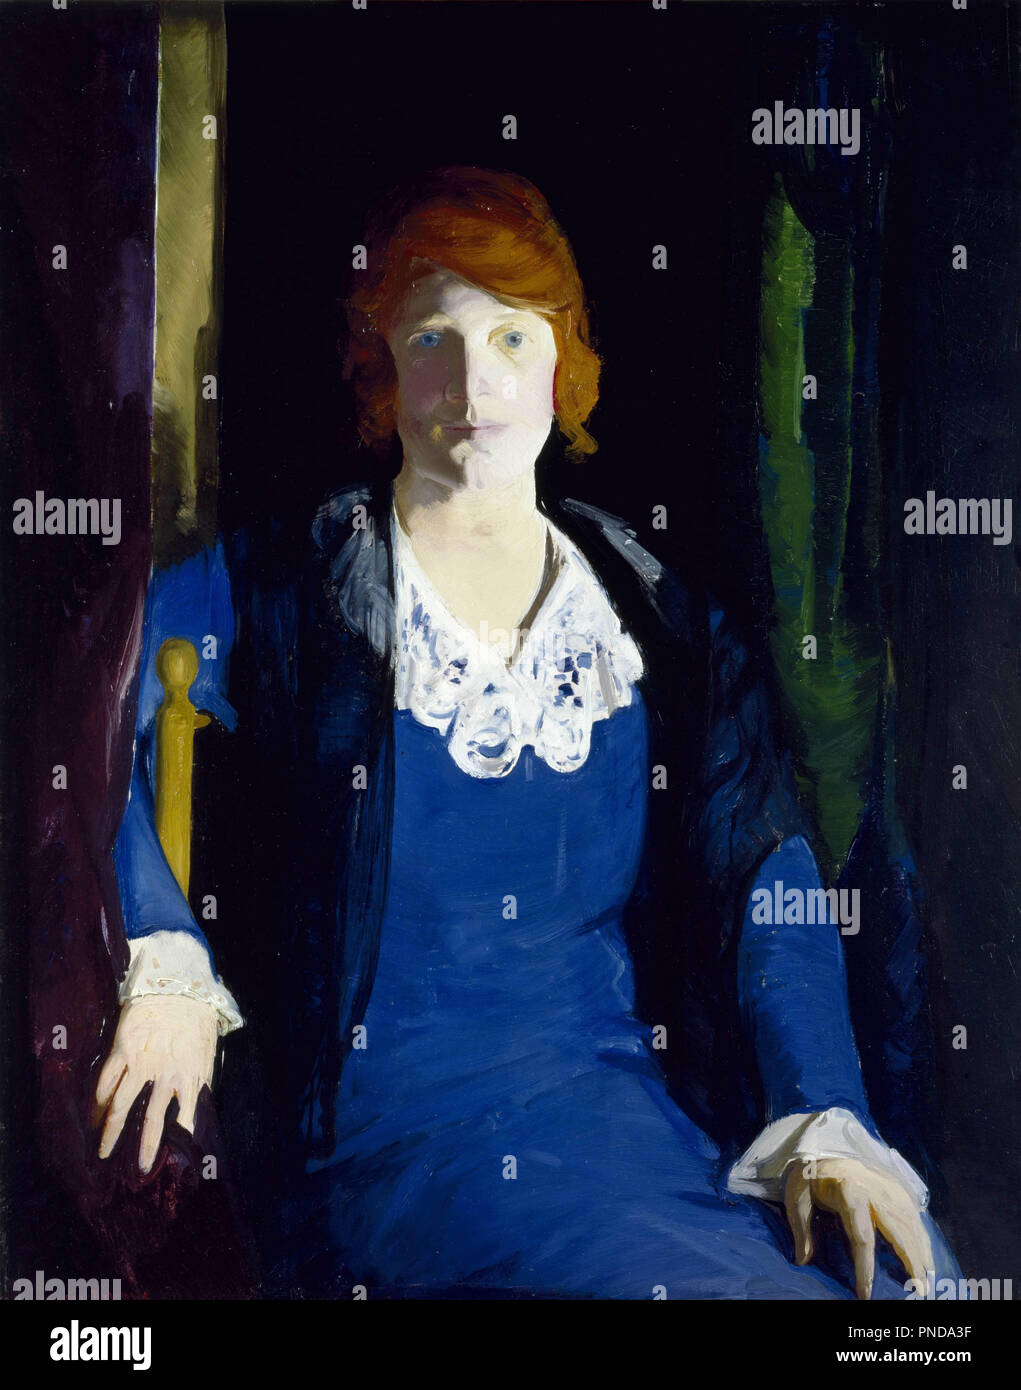 Portrait of Florence Pierce. Date/Period: August 1914. Painting. Oil on canvas. Height: 96.5 cm (38 in); Width: 76.2 cm (30 in). Author: George Bellows. Bellows, George. Stock Photo